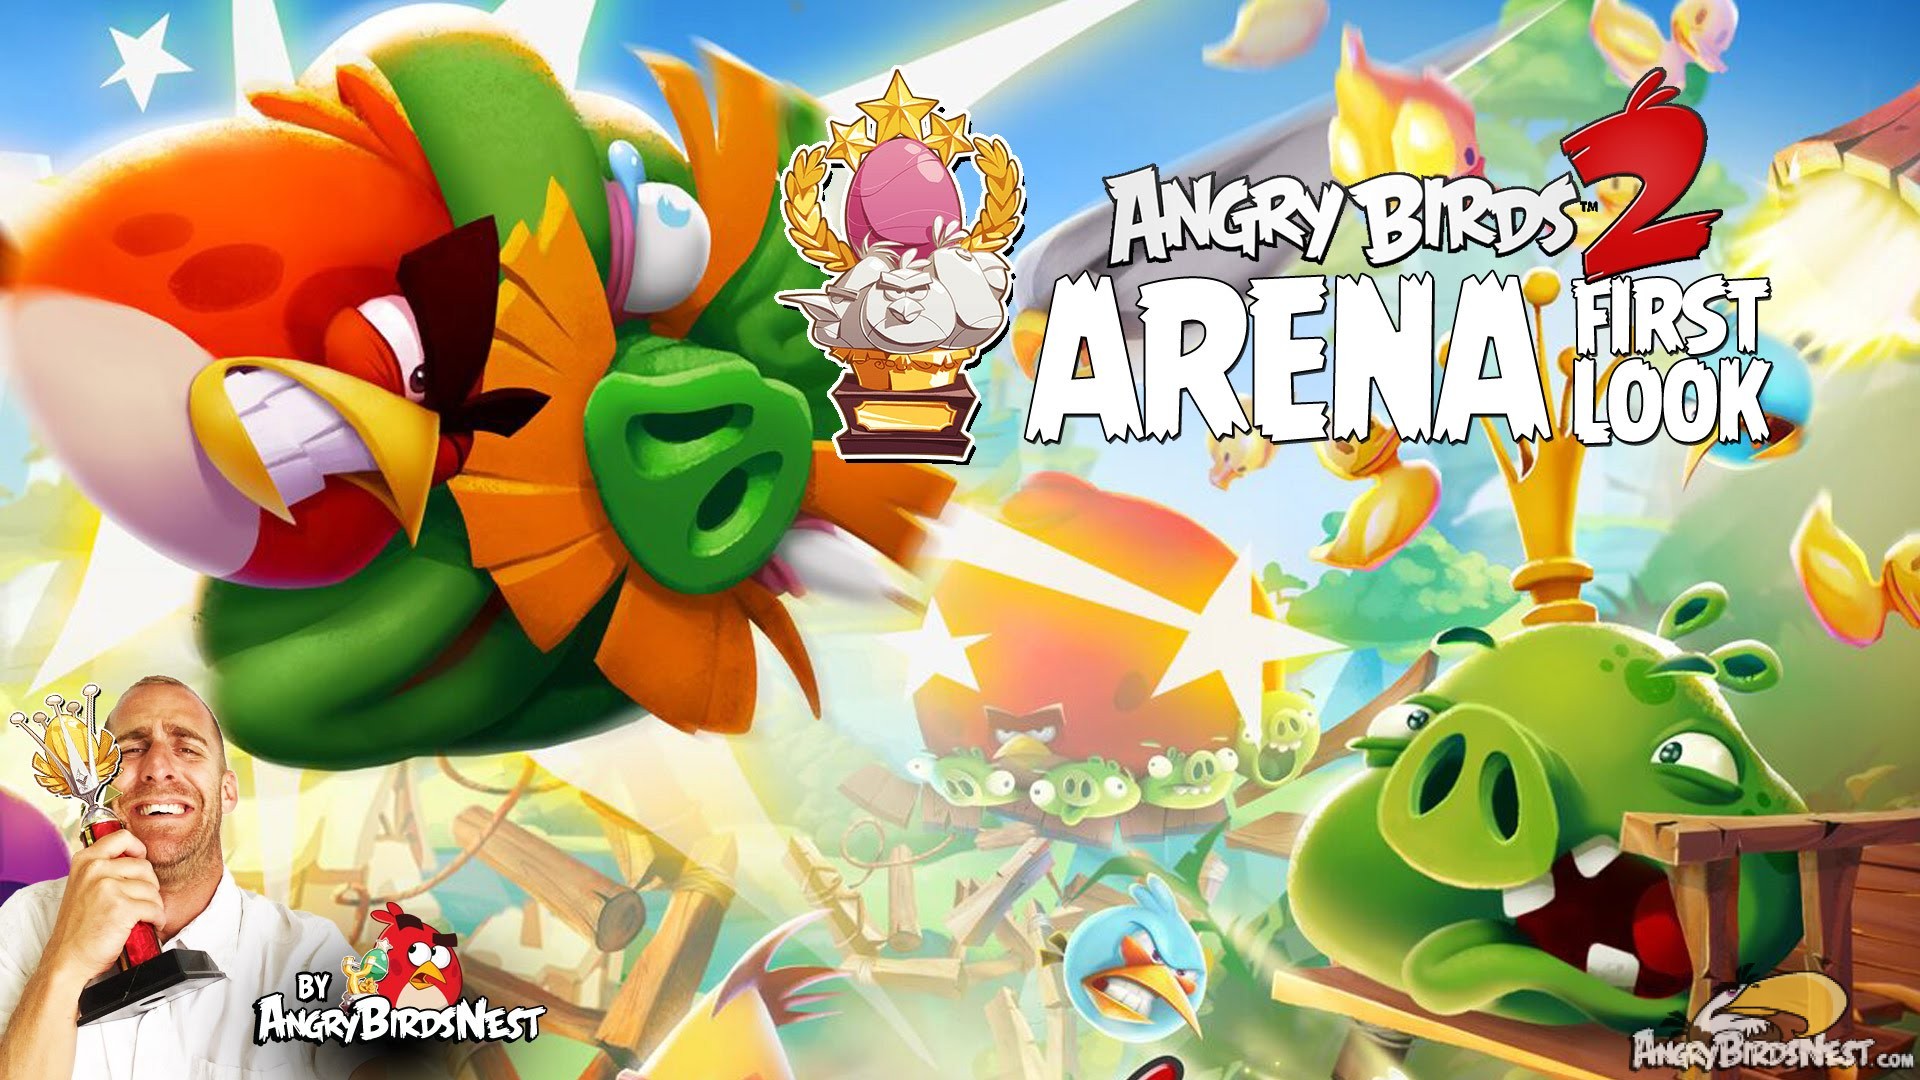 A first look at Arena?